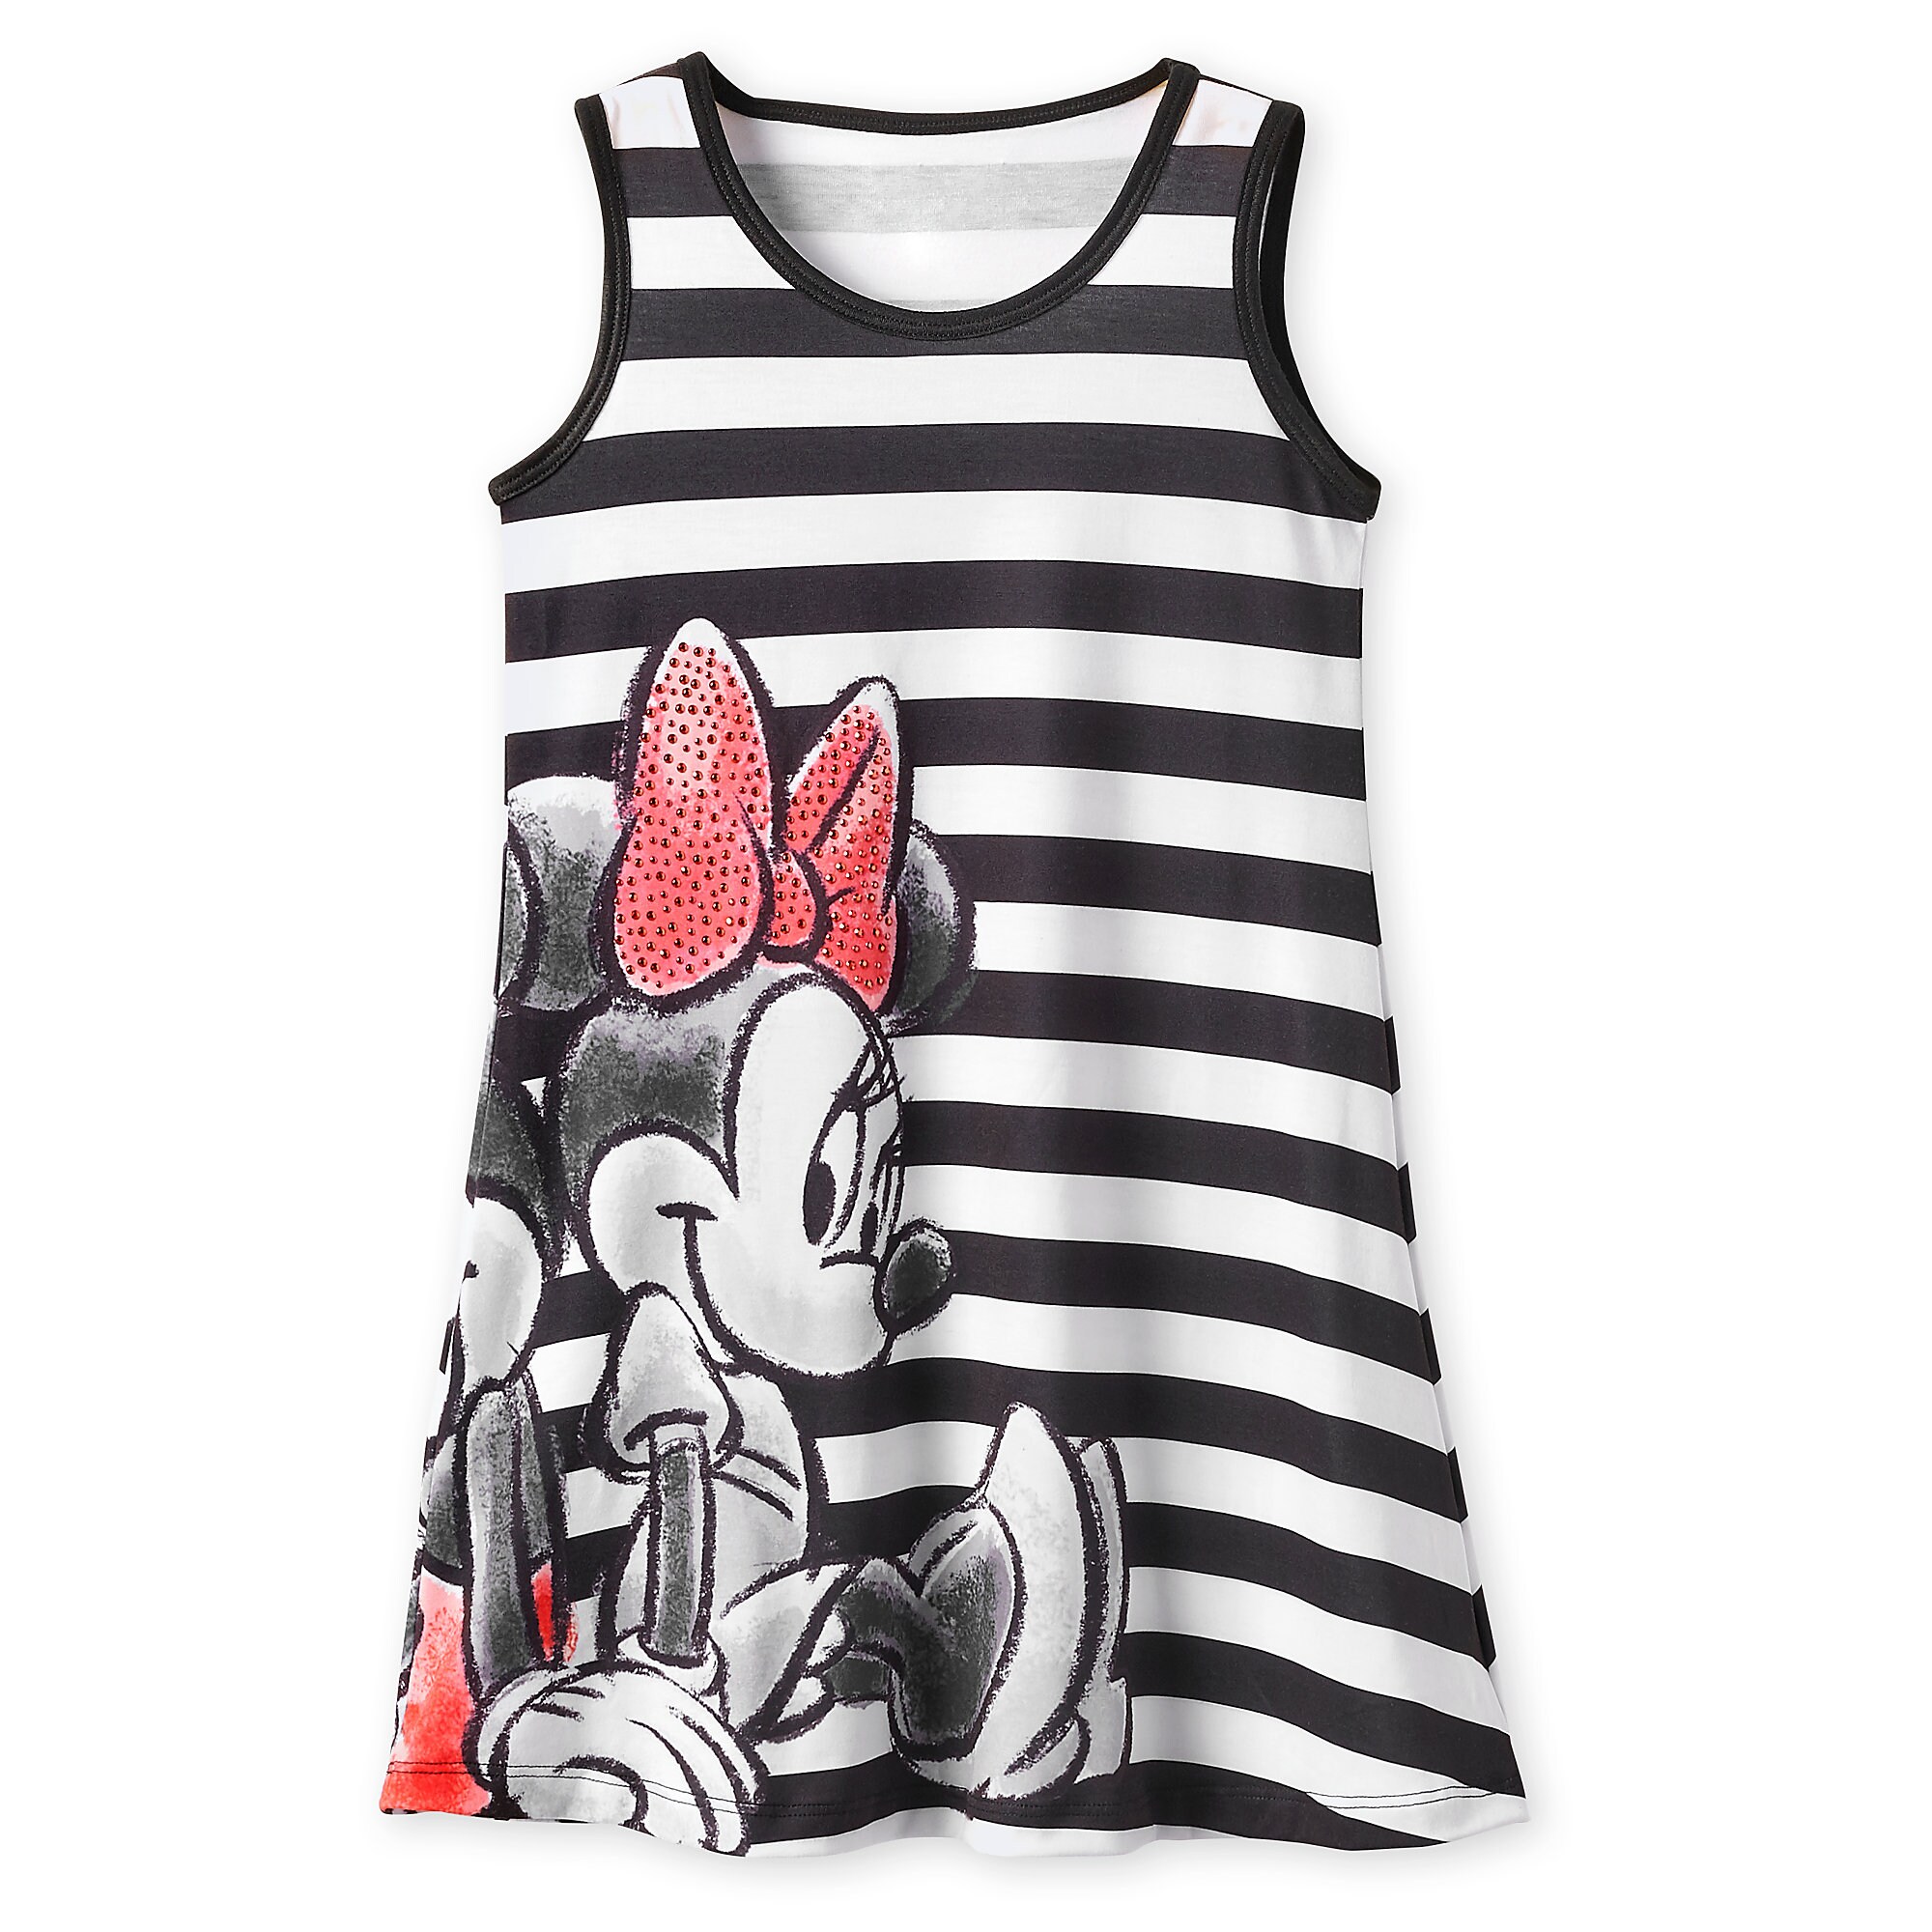 Mickey and Minnie Mouse Striped Dress for Girls - Black